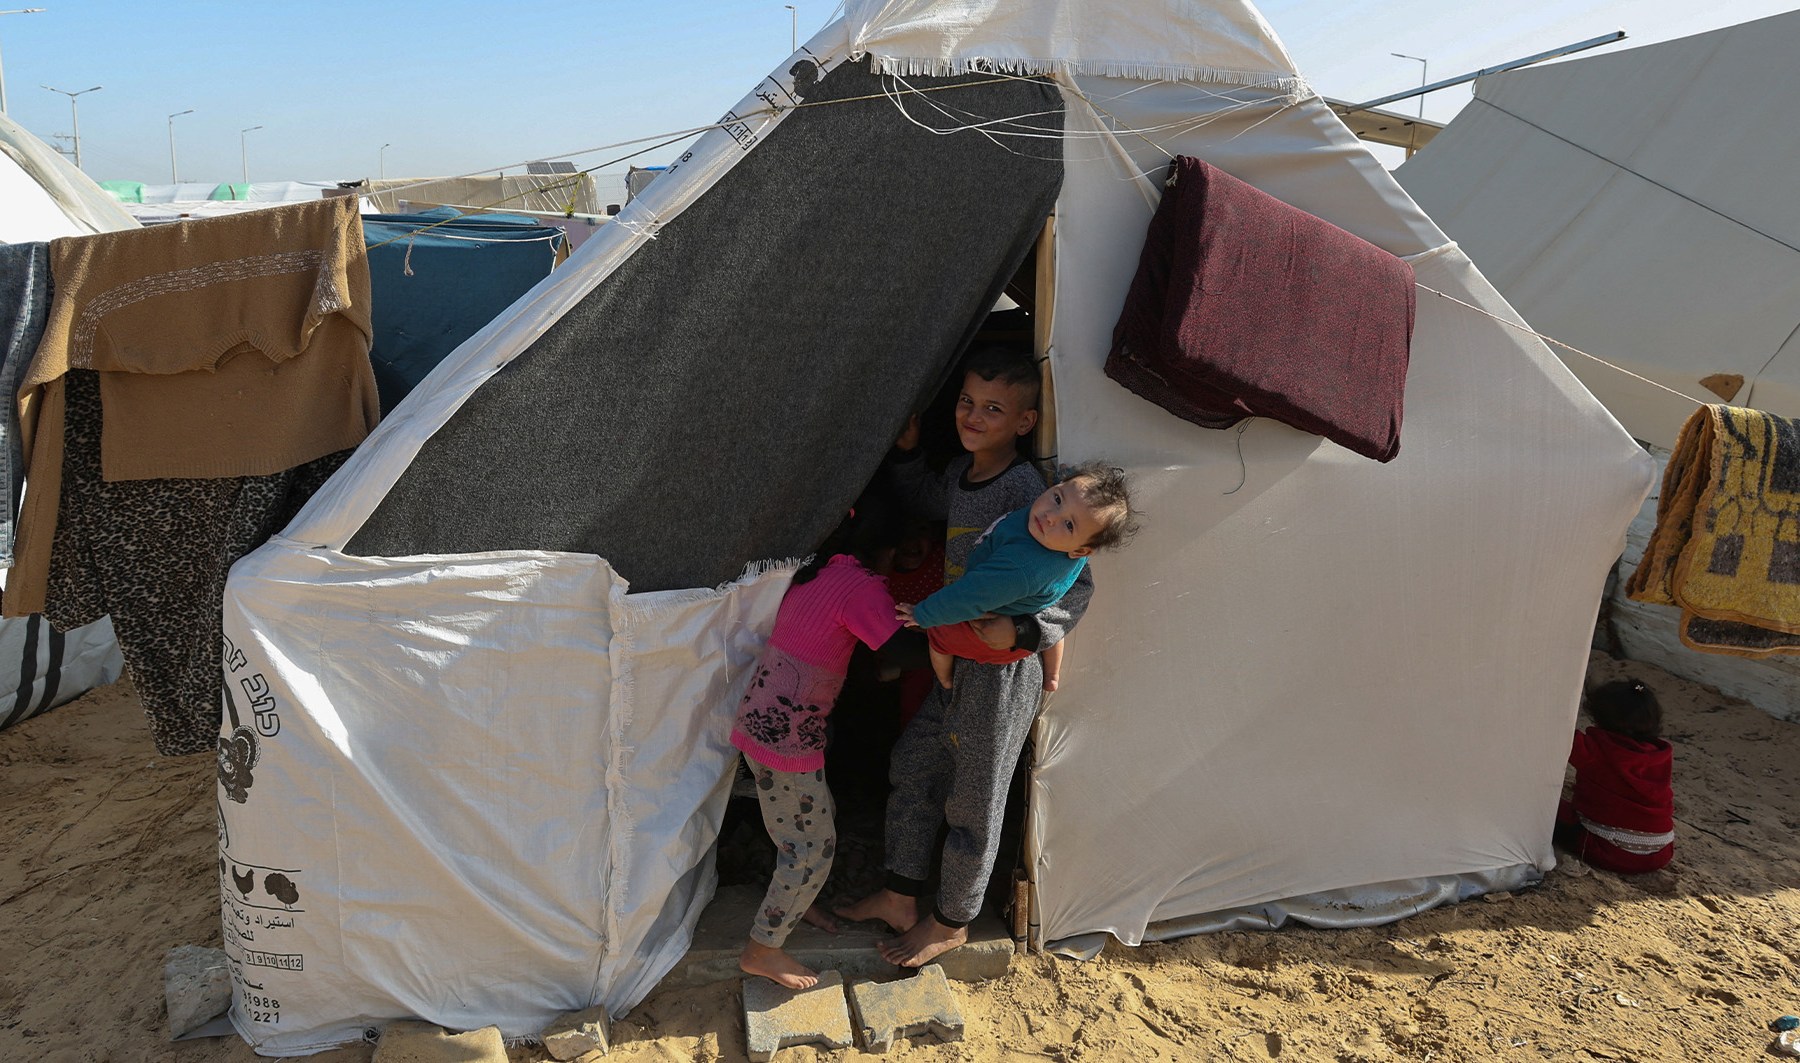 Palestinians’ tents in Gaza offer no shelter from Israeli bombardment | Israel War on Gaza